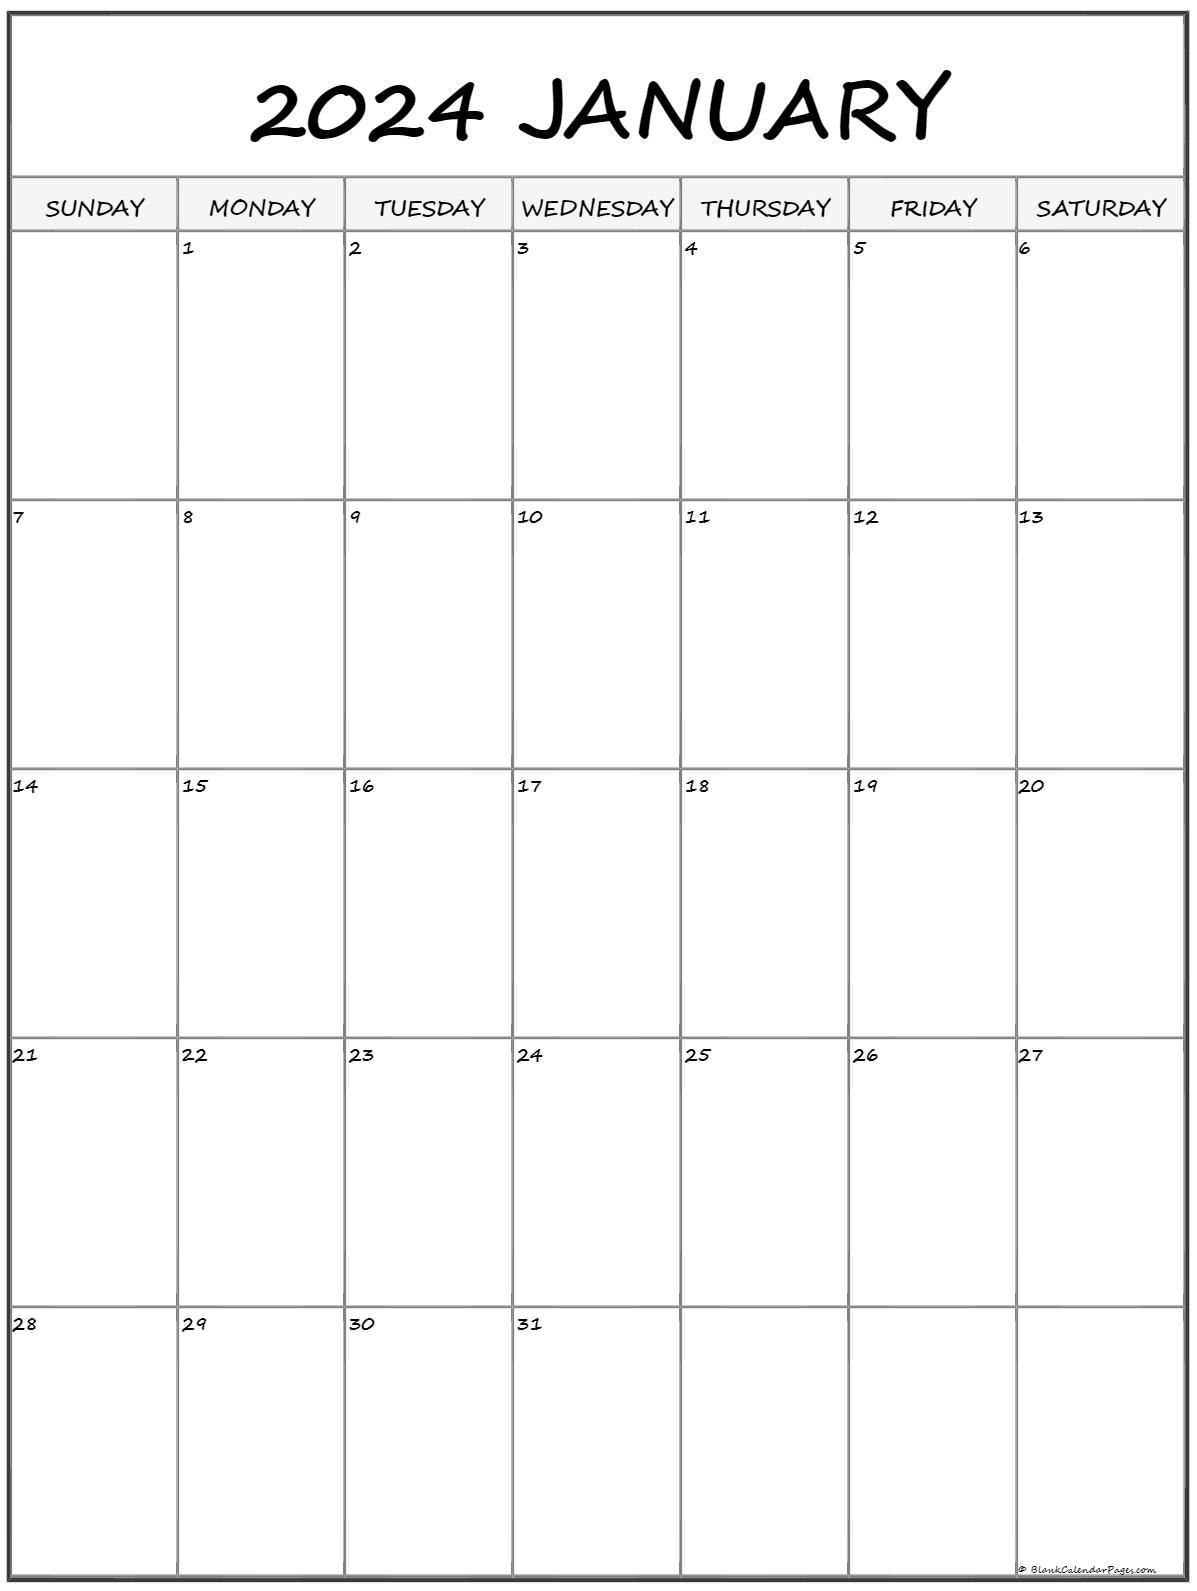 2024 Printable Calendar By Month Vertical And Mandy Rozelle - Free Printable 2024 Calender That I Can Write On